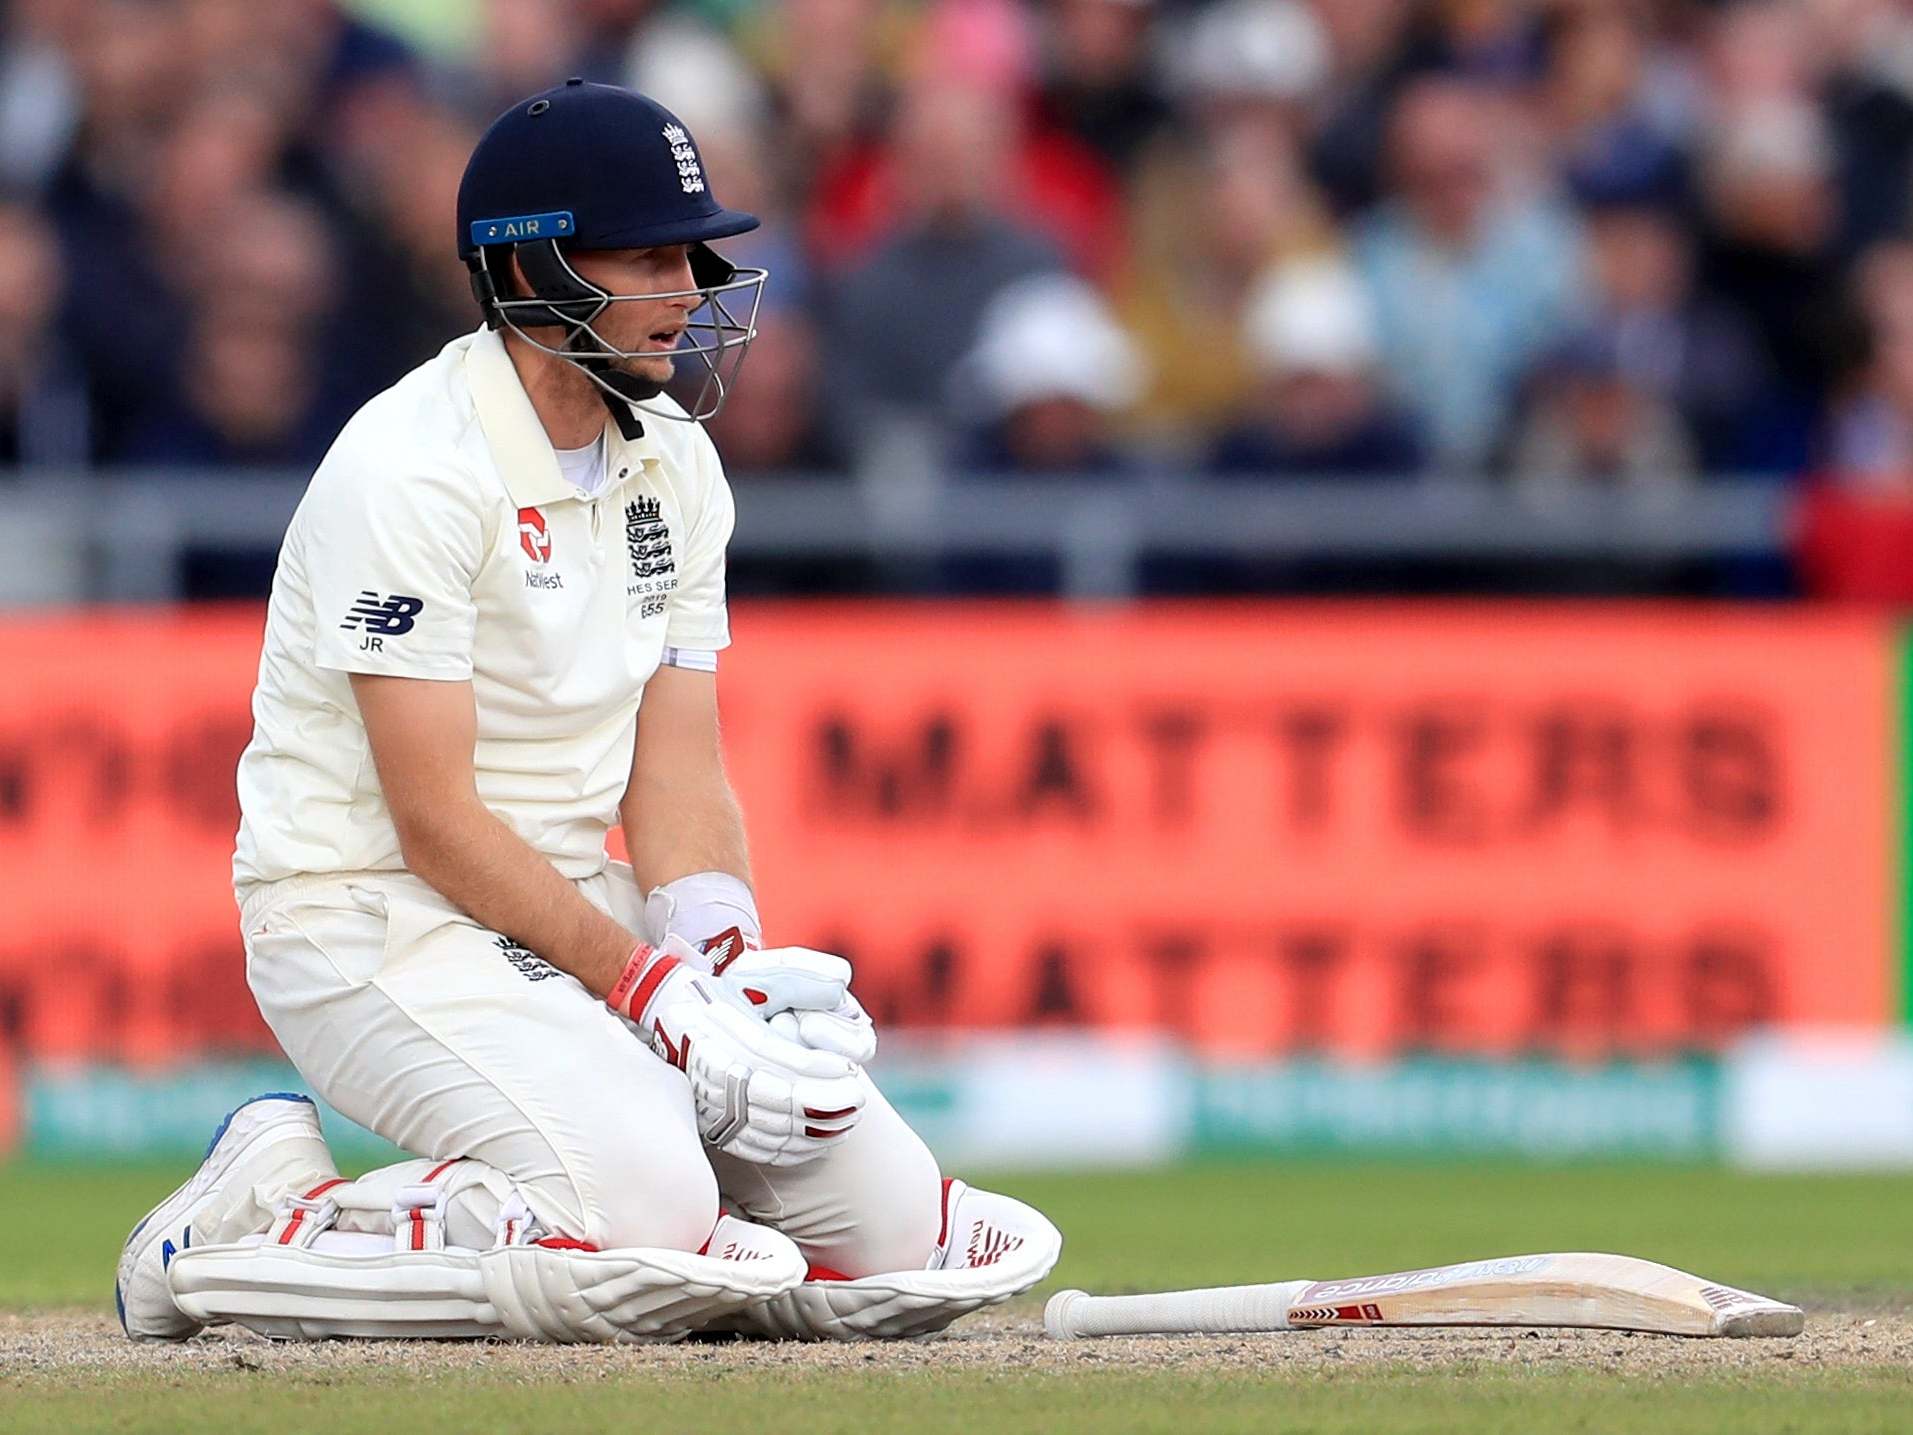 England's Joe Root goes down after being struck by the ball during day three of the fourth Ashes Test at Emirates Old Trafford on 6 September 2019